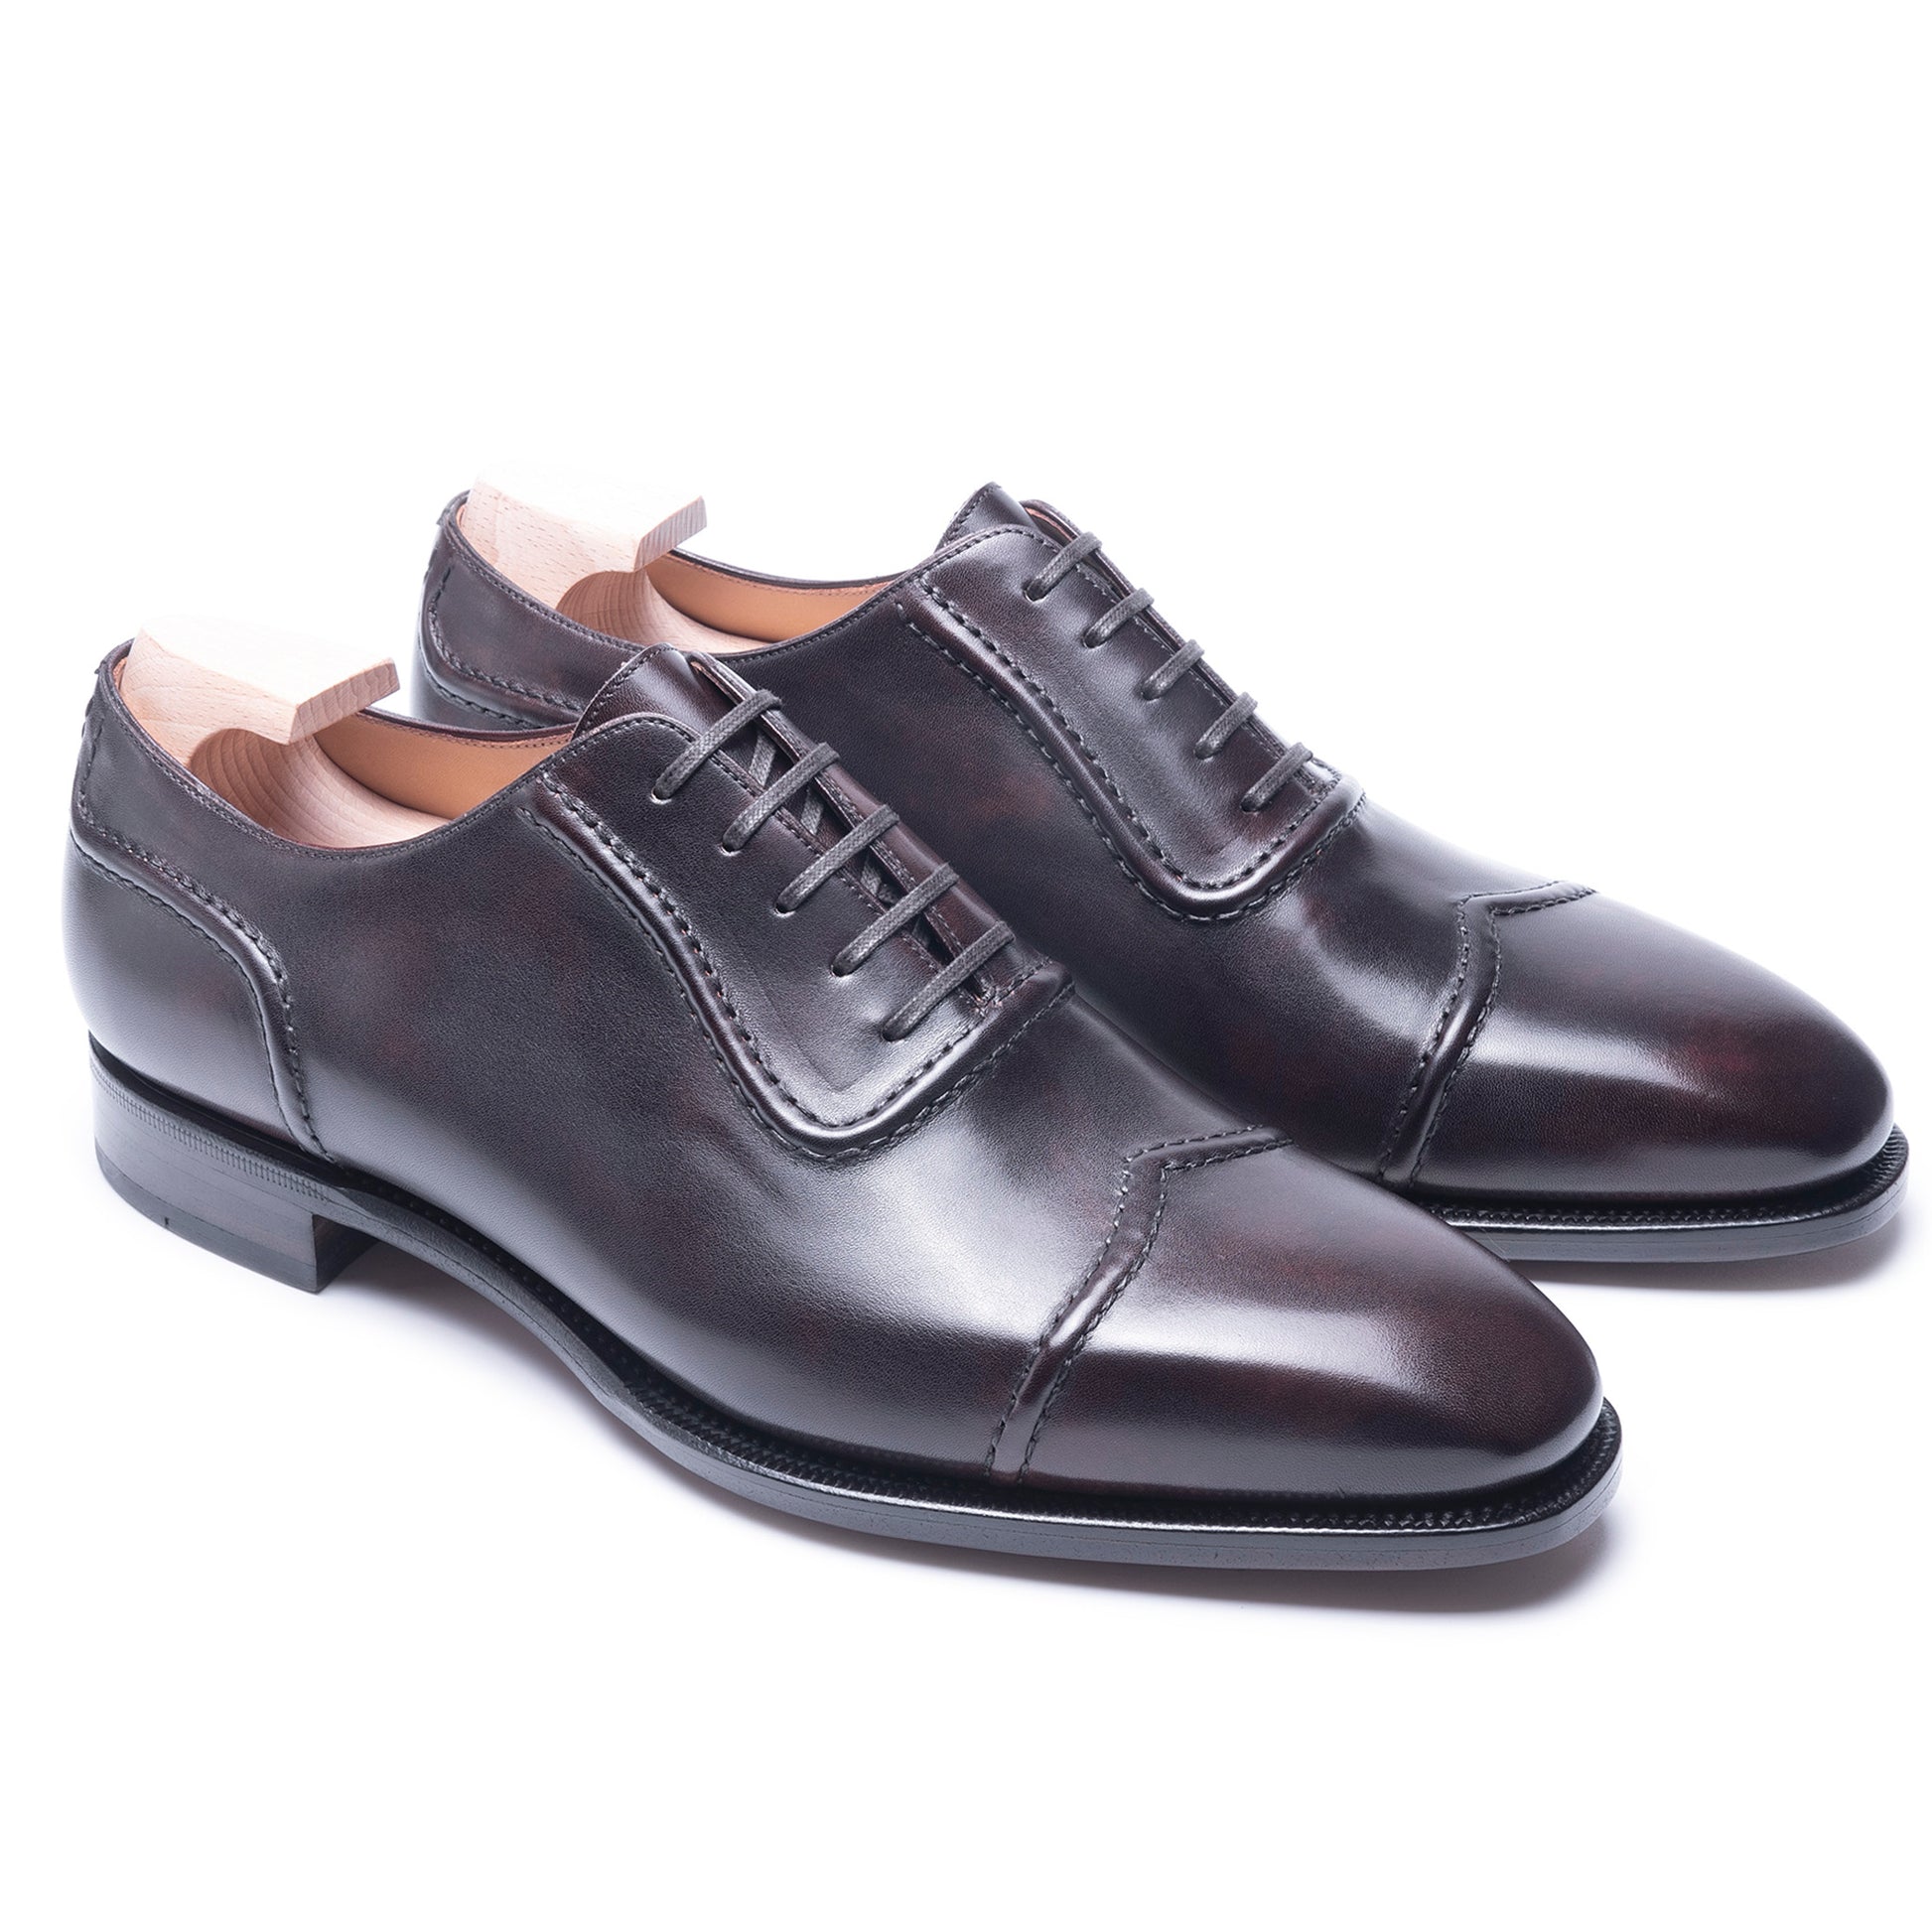 TLB Mallorca leather shoes 218 / PICASSO / VEGANO DARK BROWN